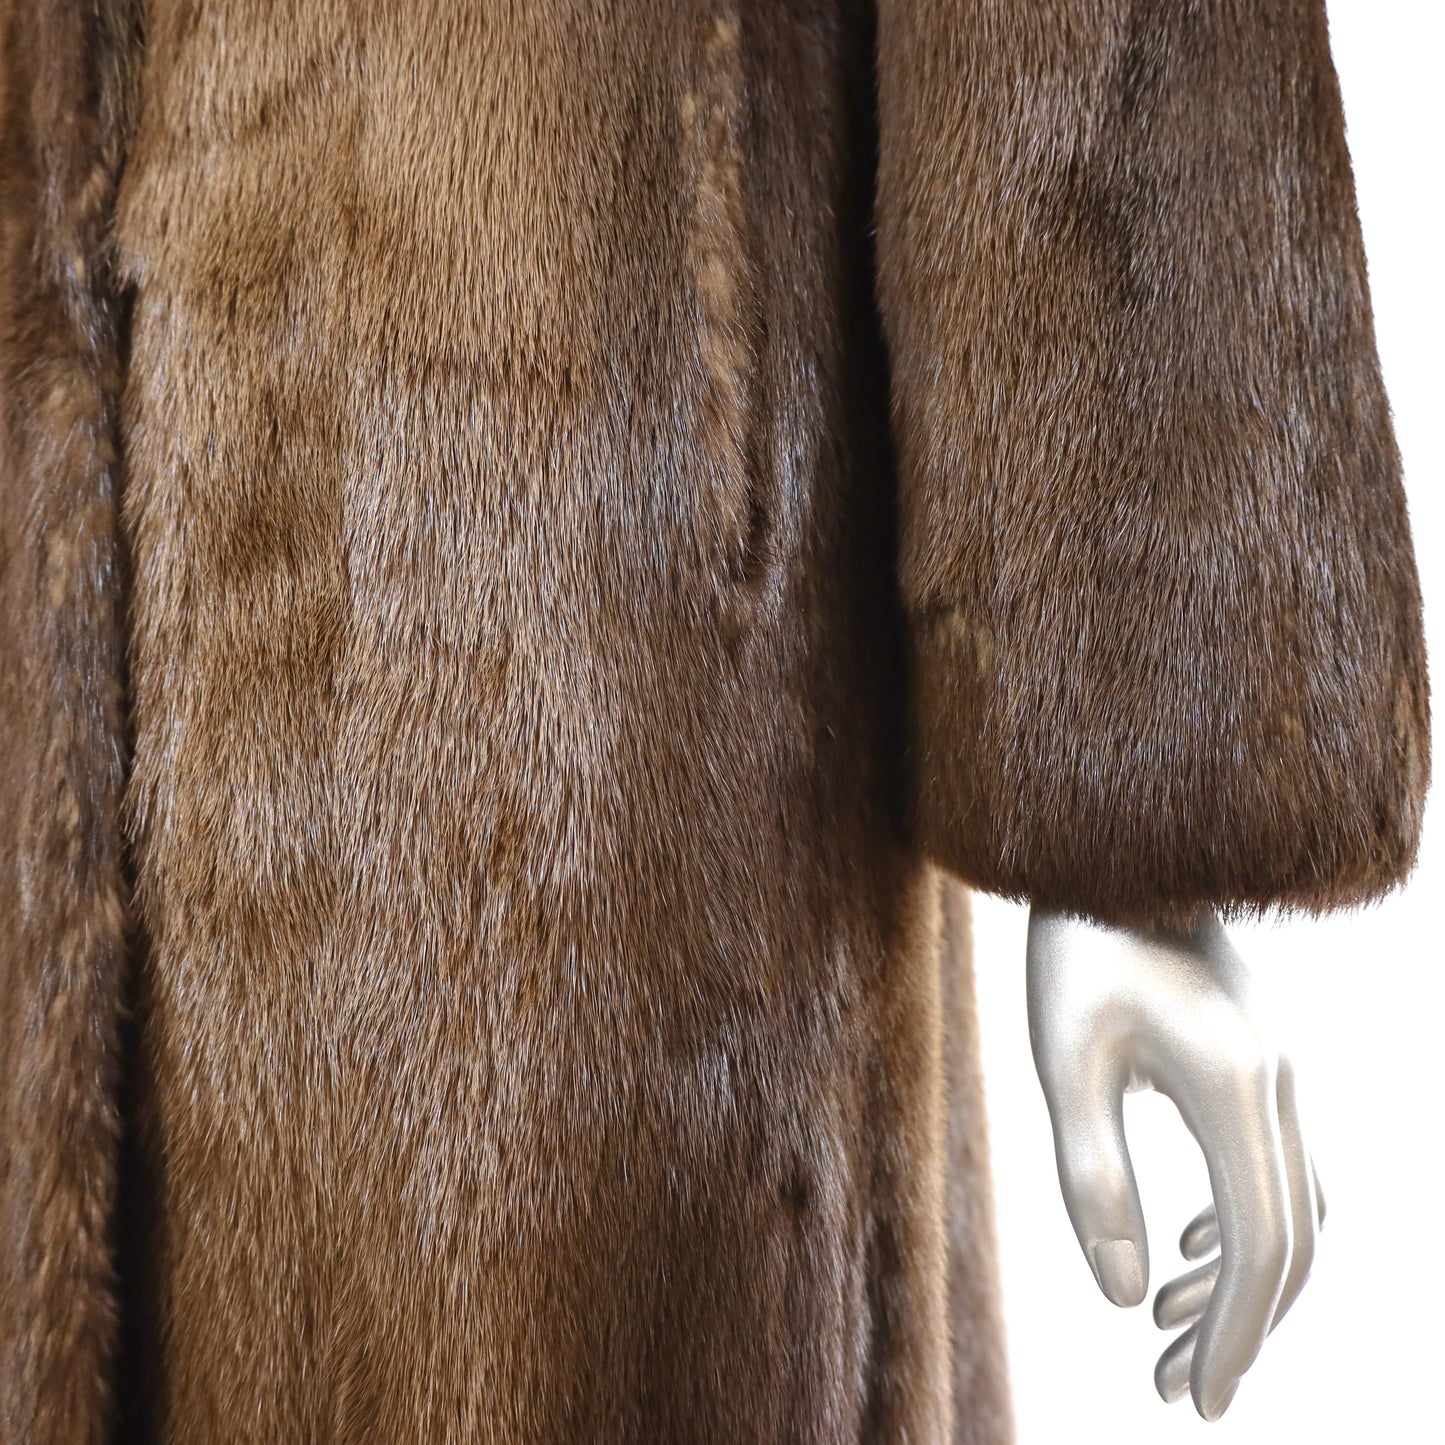 Revillon Otter Coat with Fisher Collar- Size XS